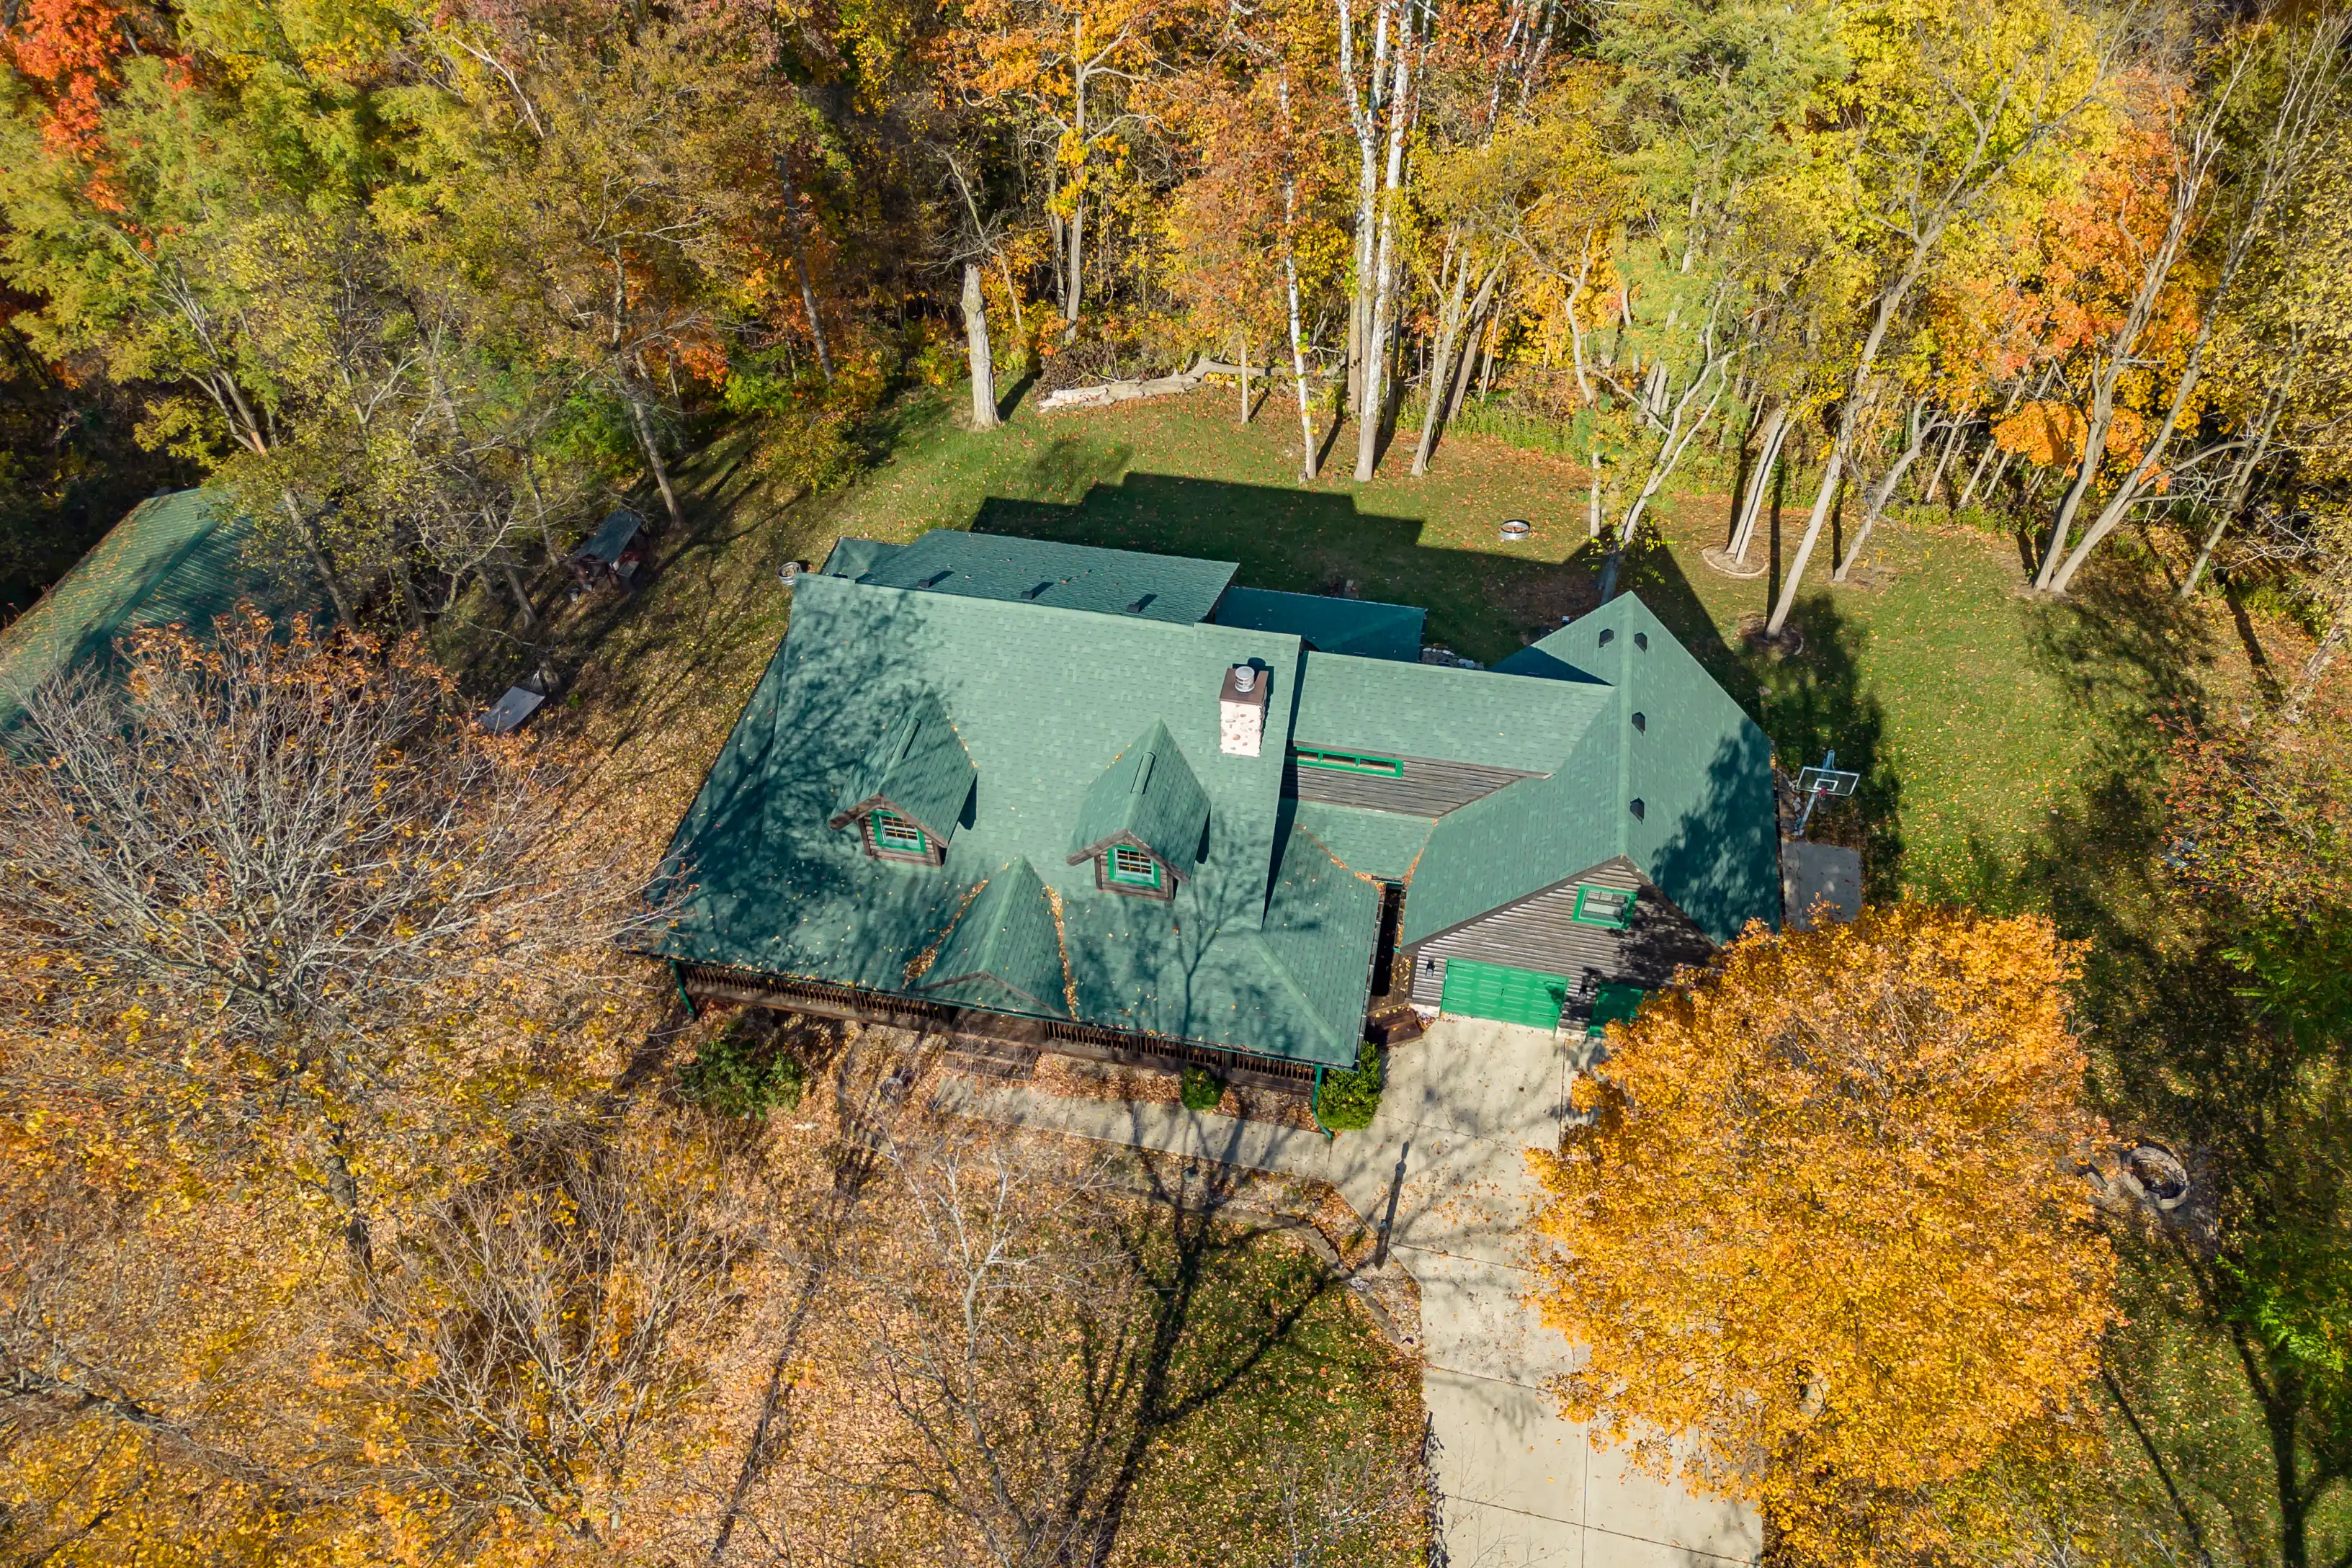 Aerial view of a large house with a green roof surrounded by trees in autumn foliage.